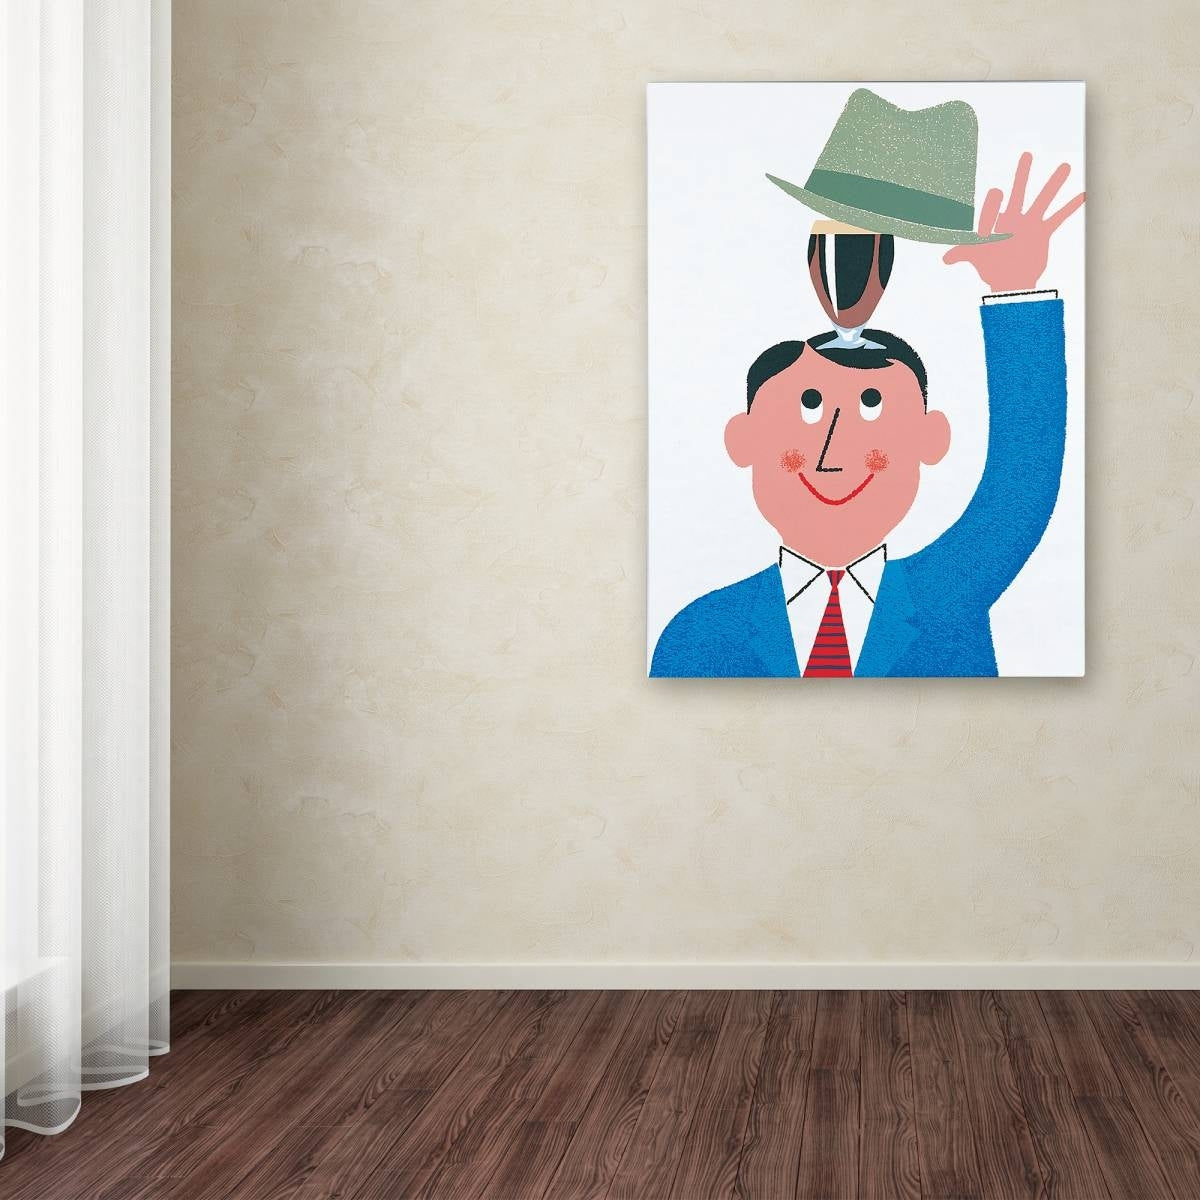 A playful illustration of a man with a hat on his head, created on Guinness Brewery's 'Guinness XV' Canvas Art.